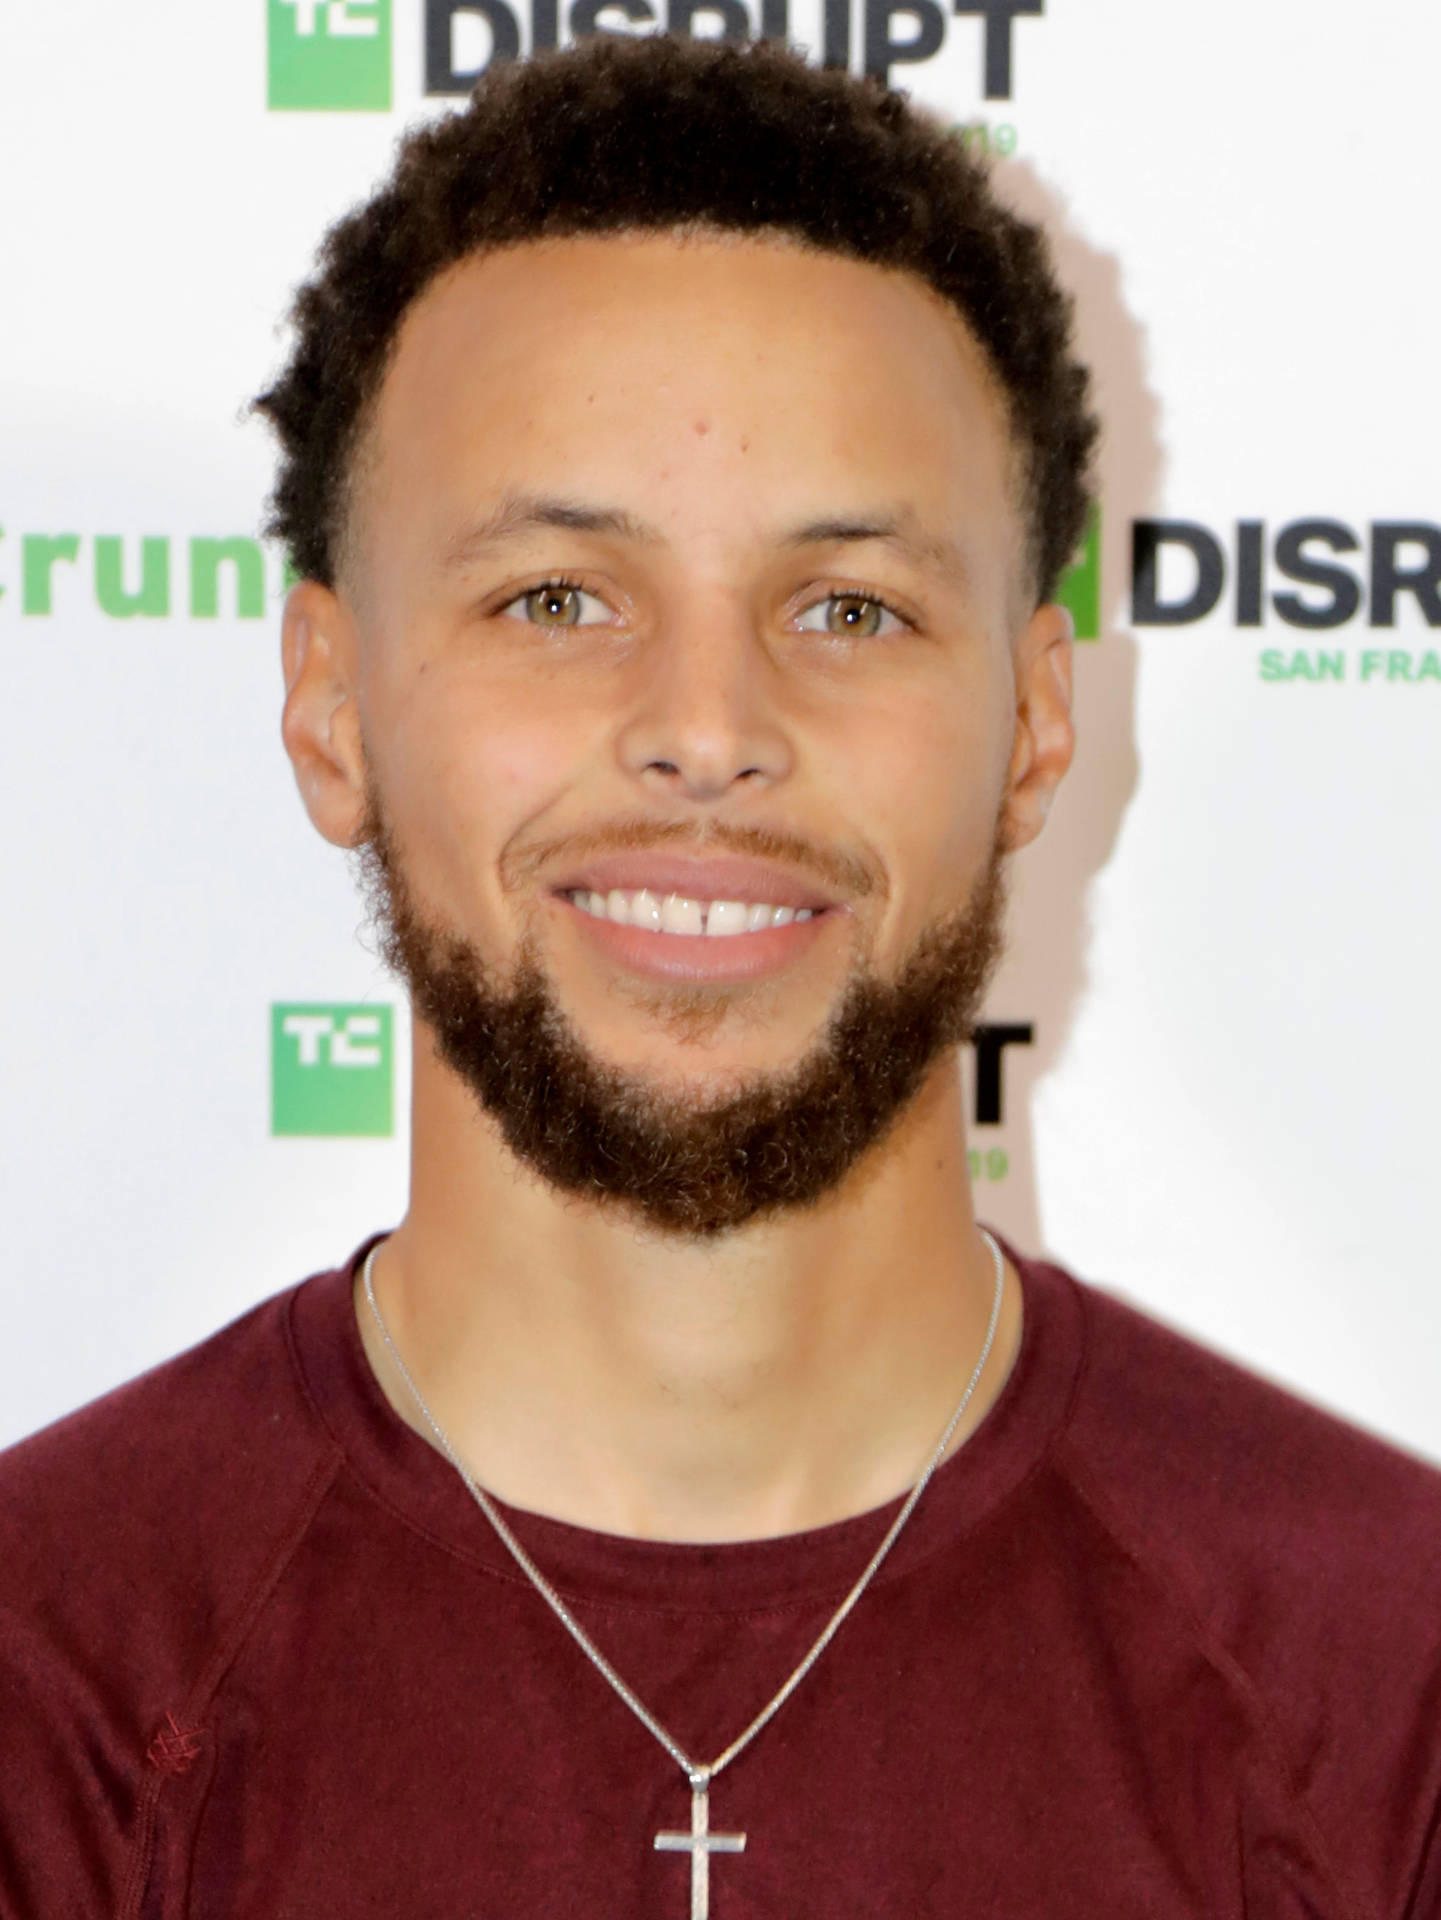 Steph Curry At Techcrunch's Disrupt Sf Conference Background